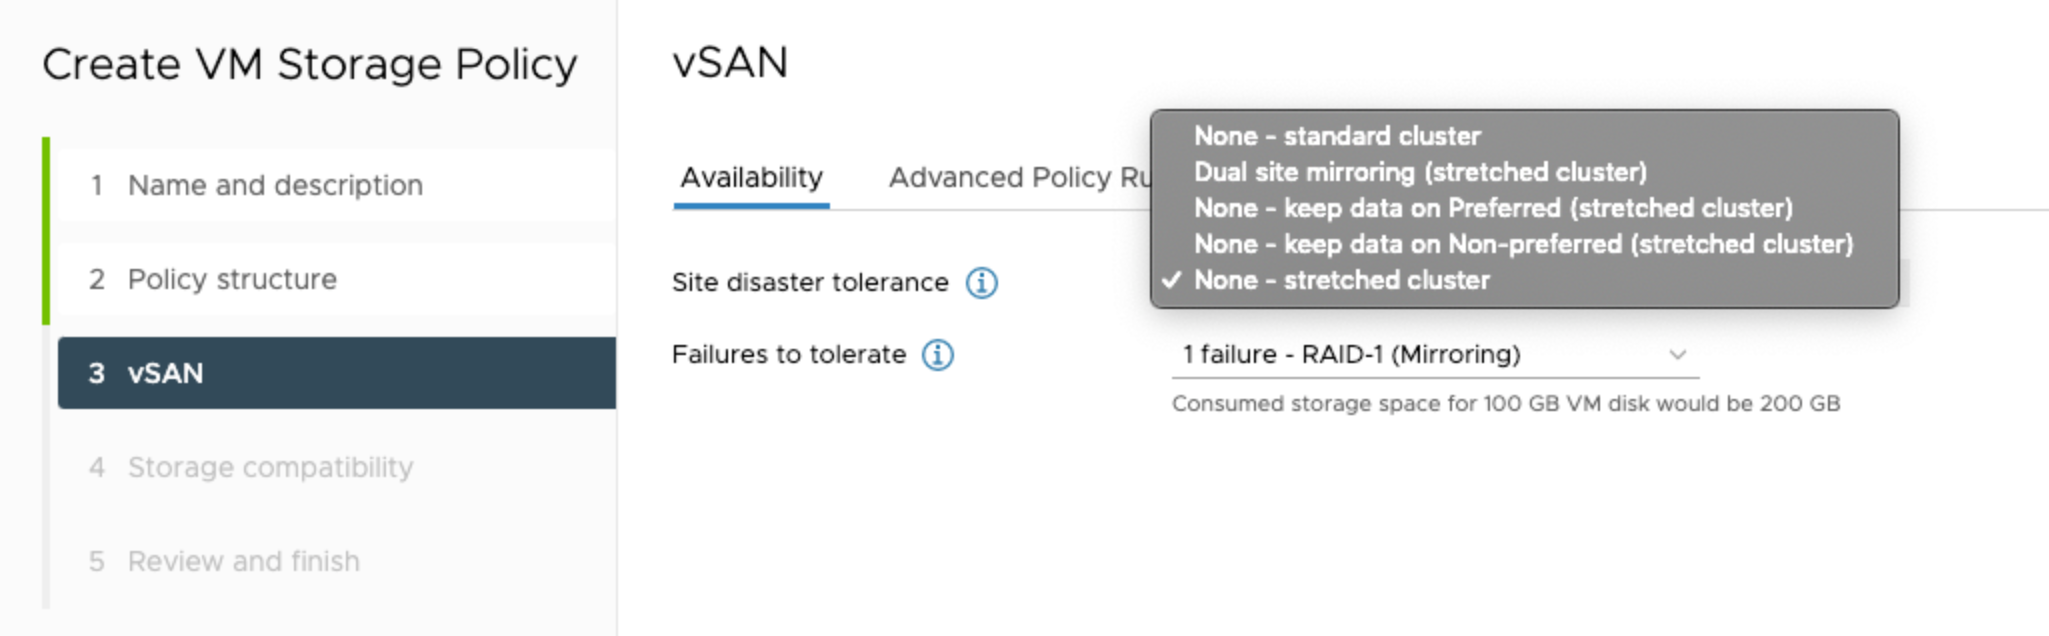 The screenshot shows options available for Site disaster tolerance.